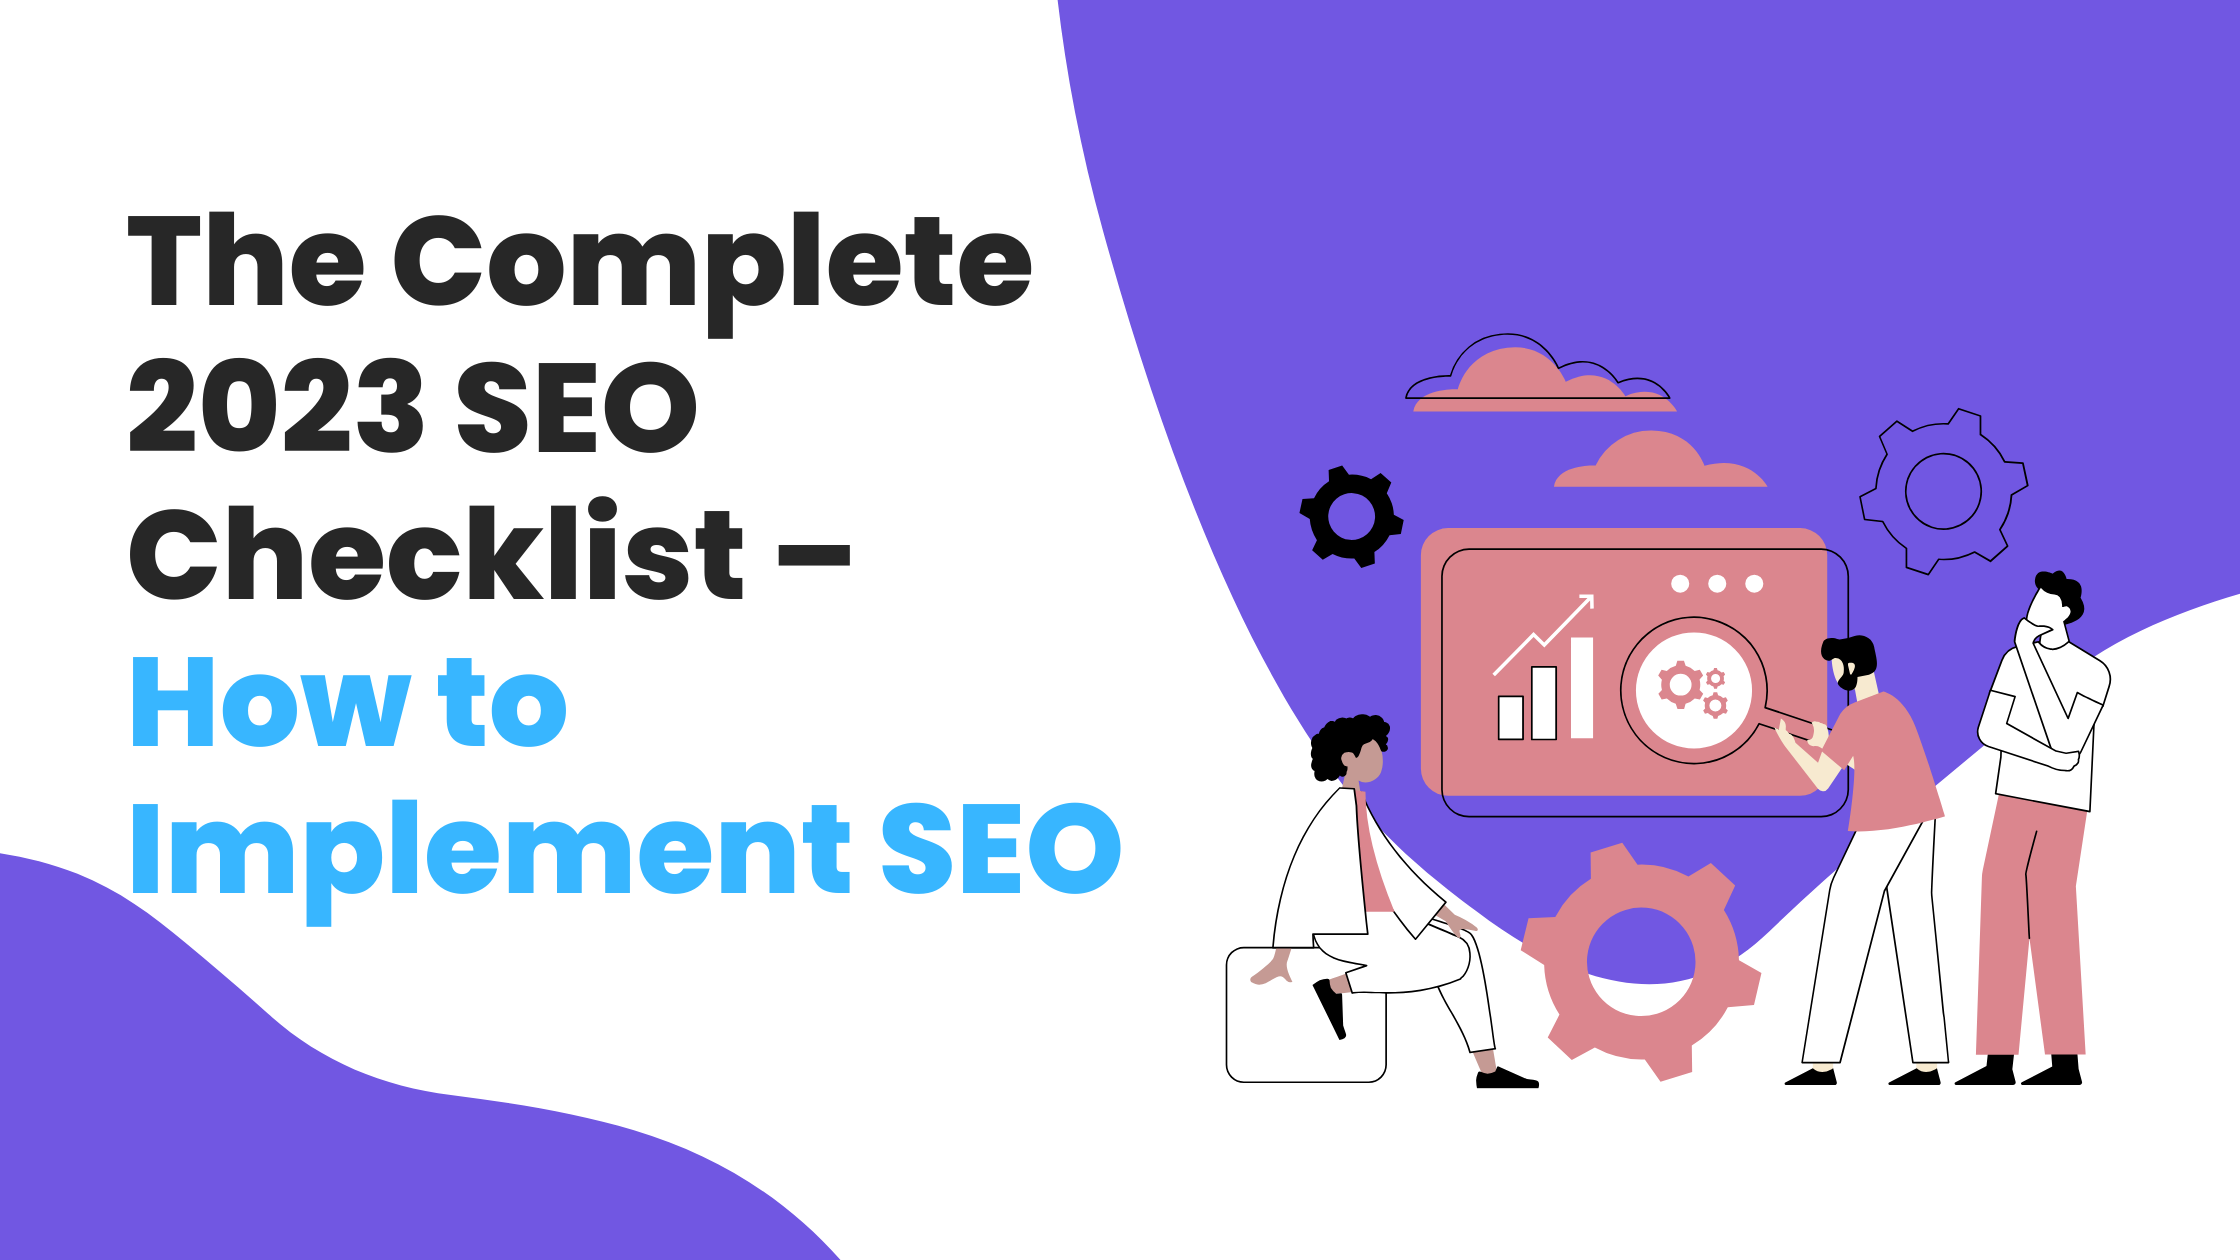 The Complete 2023 SEO Checklist – How to Implement SEO